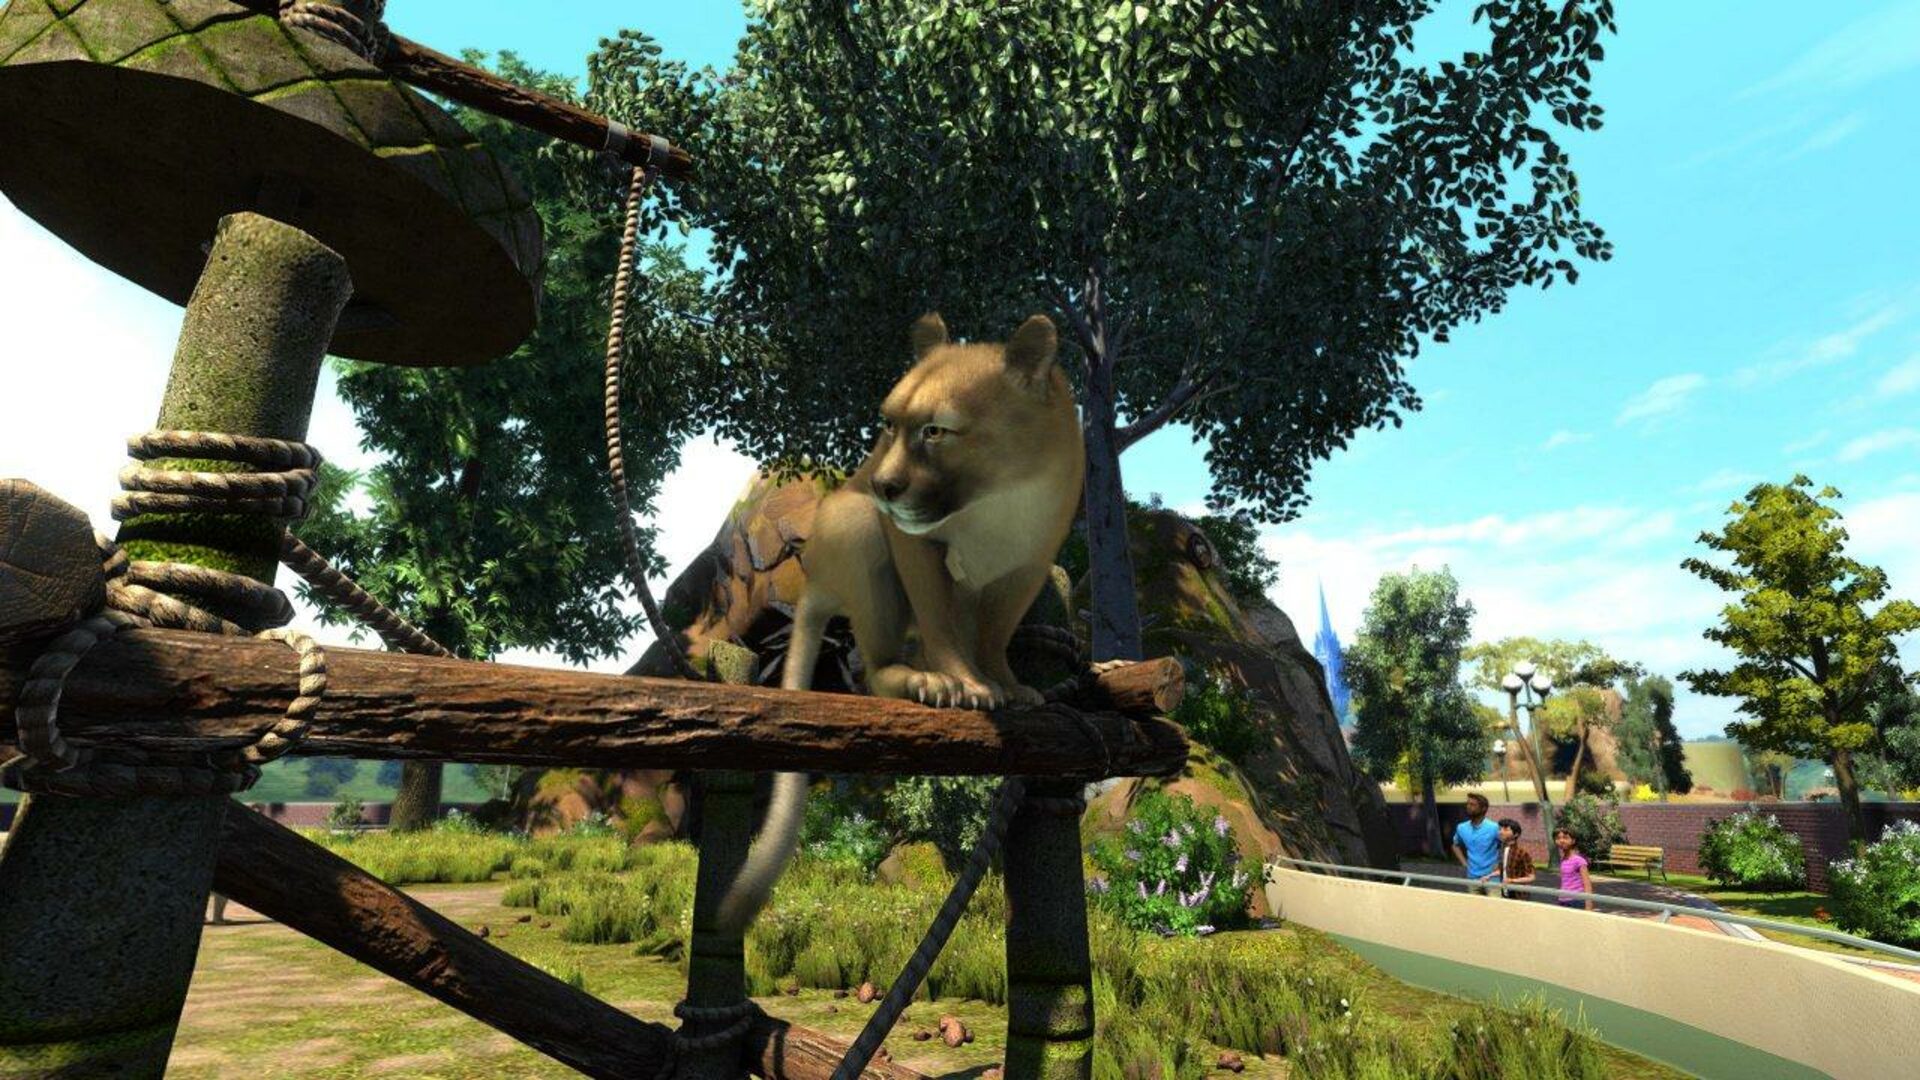 Zoo Tycoon Ultimate Animal Collection (PC) Key cheap - Price of $4.88 for  Steam